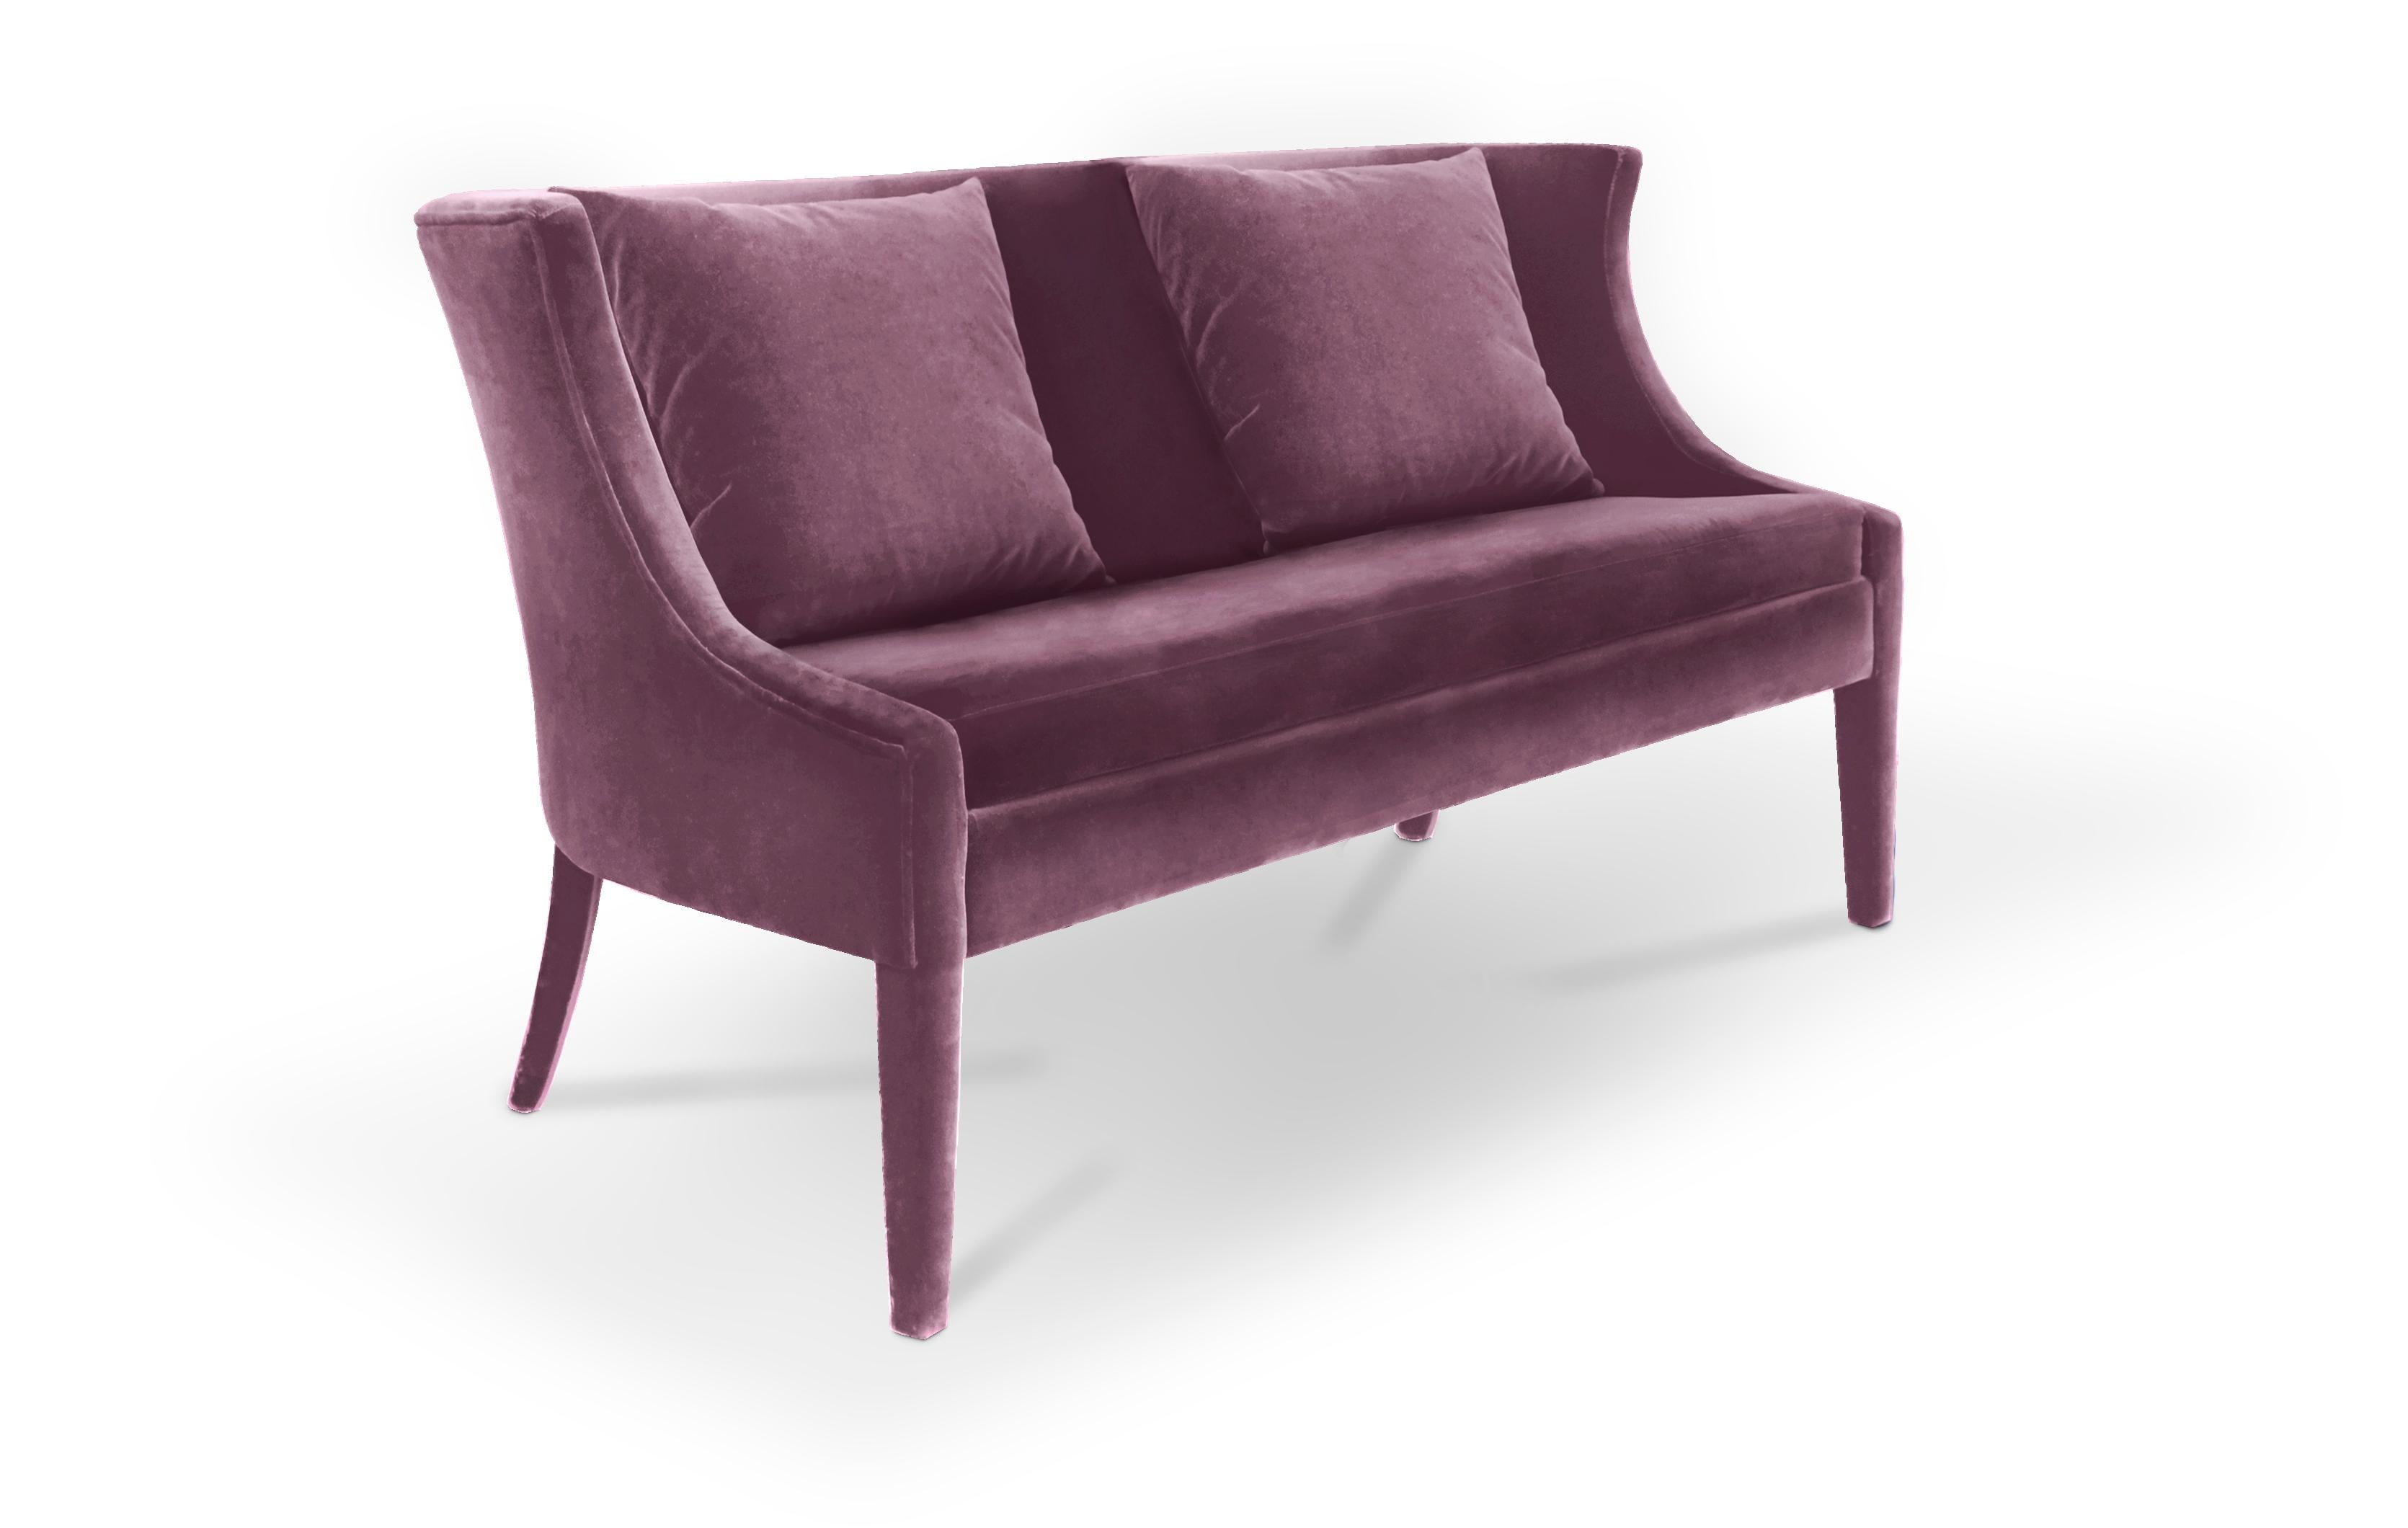 With an insatiable appetite for glamour Koket designers took the classic tub sofa to new heights with the vivacious Chignon sofa fully upholstered in a soft upholstery fabric.

Options
Upholstery: Available in any fabric from the Koket Textiles